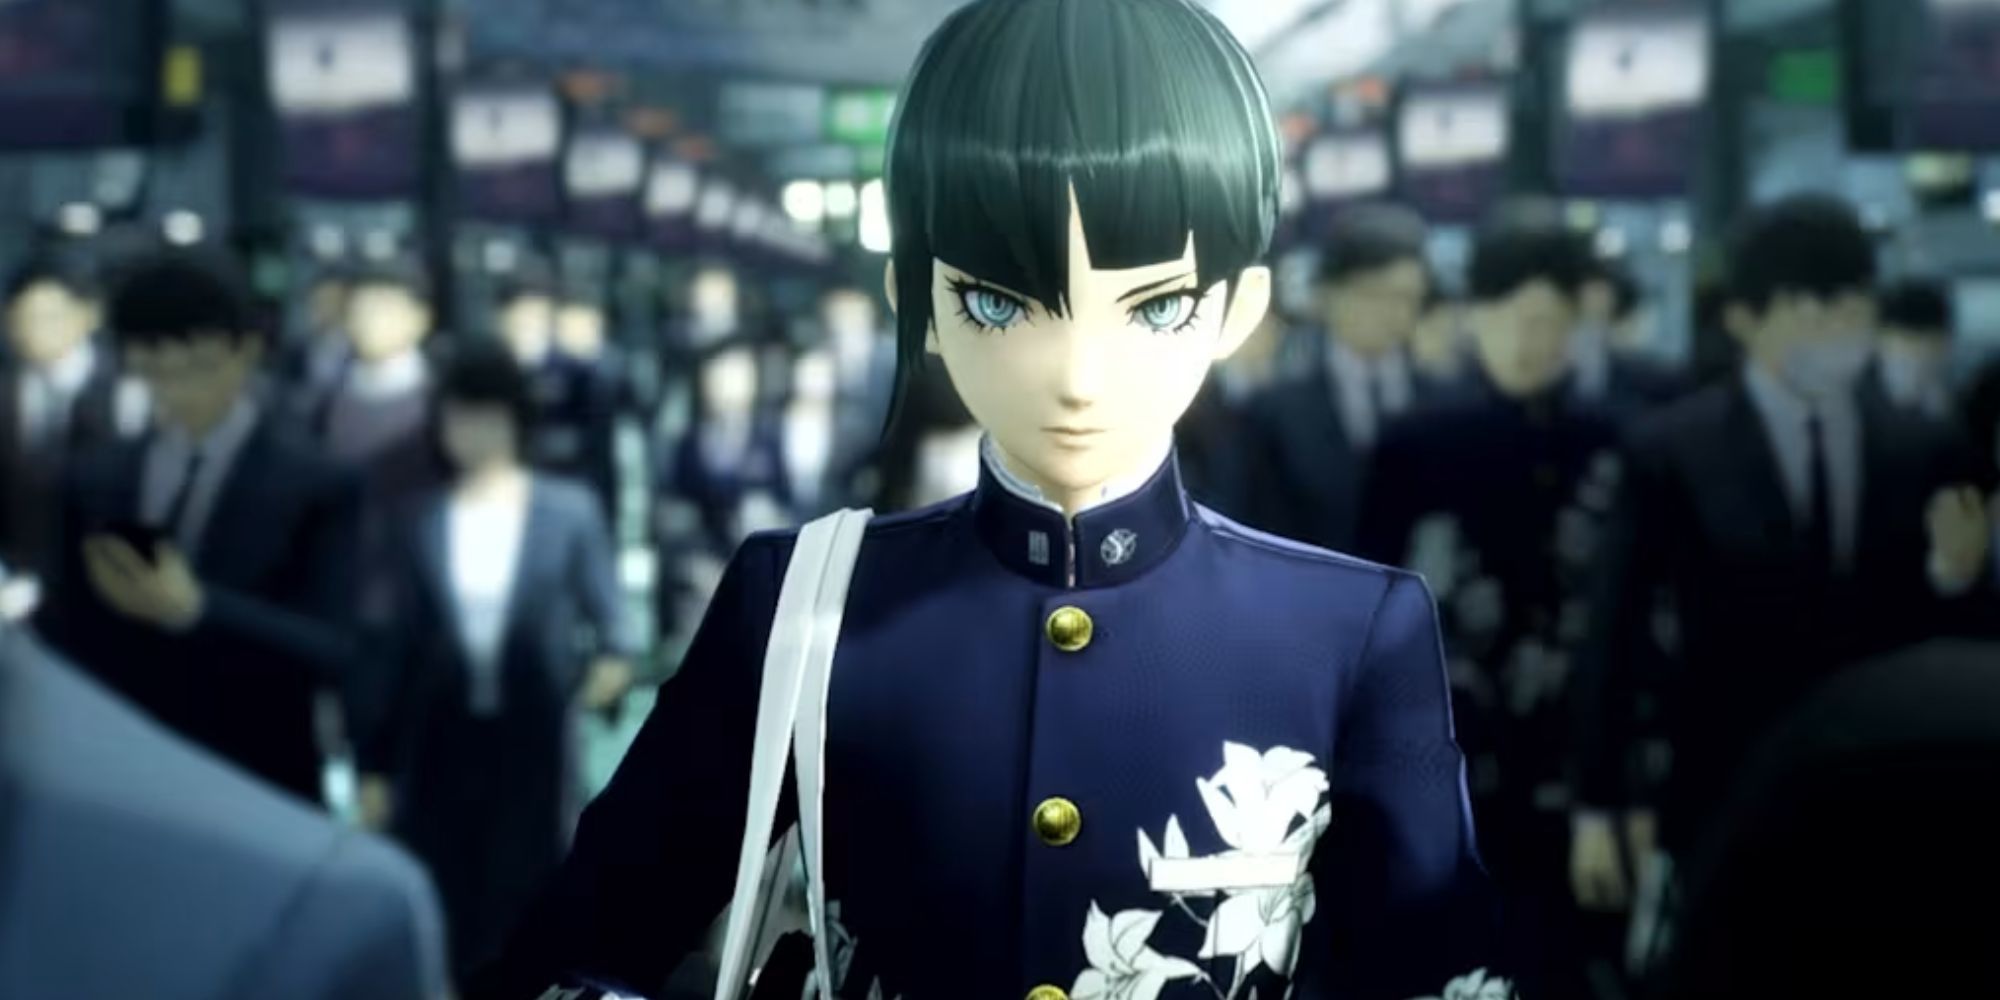 A screenshot from Shin Megami Tensei V, showing a busy crowd of people wearing suits